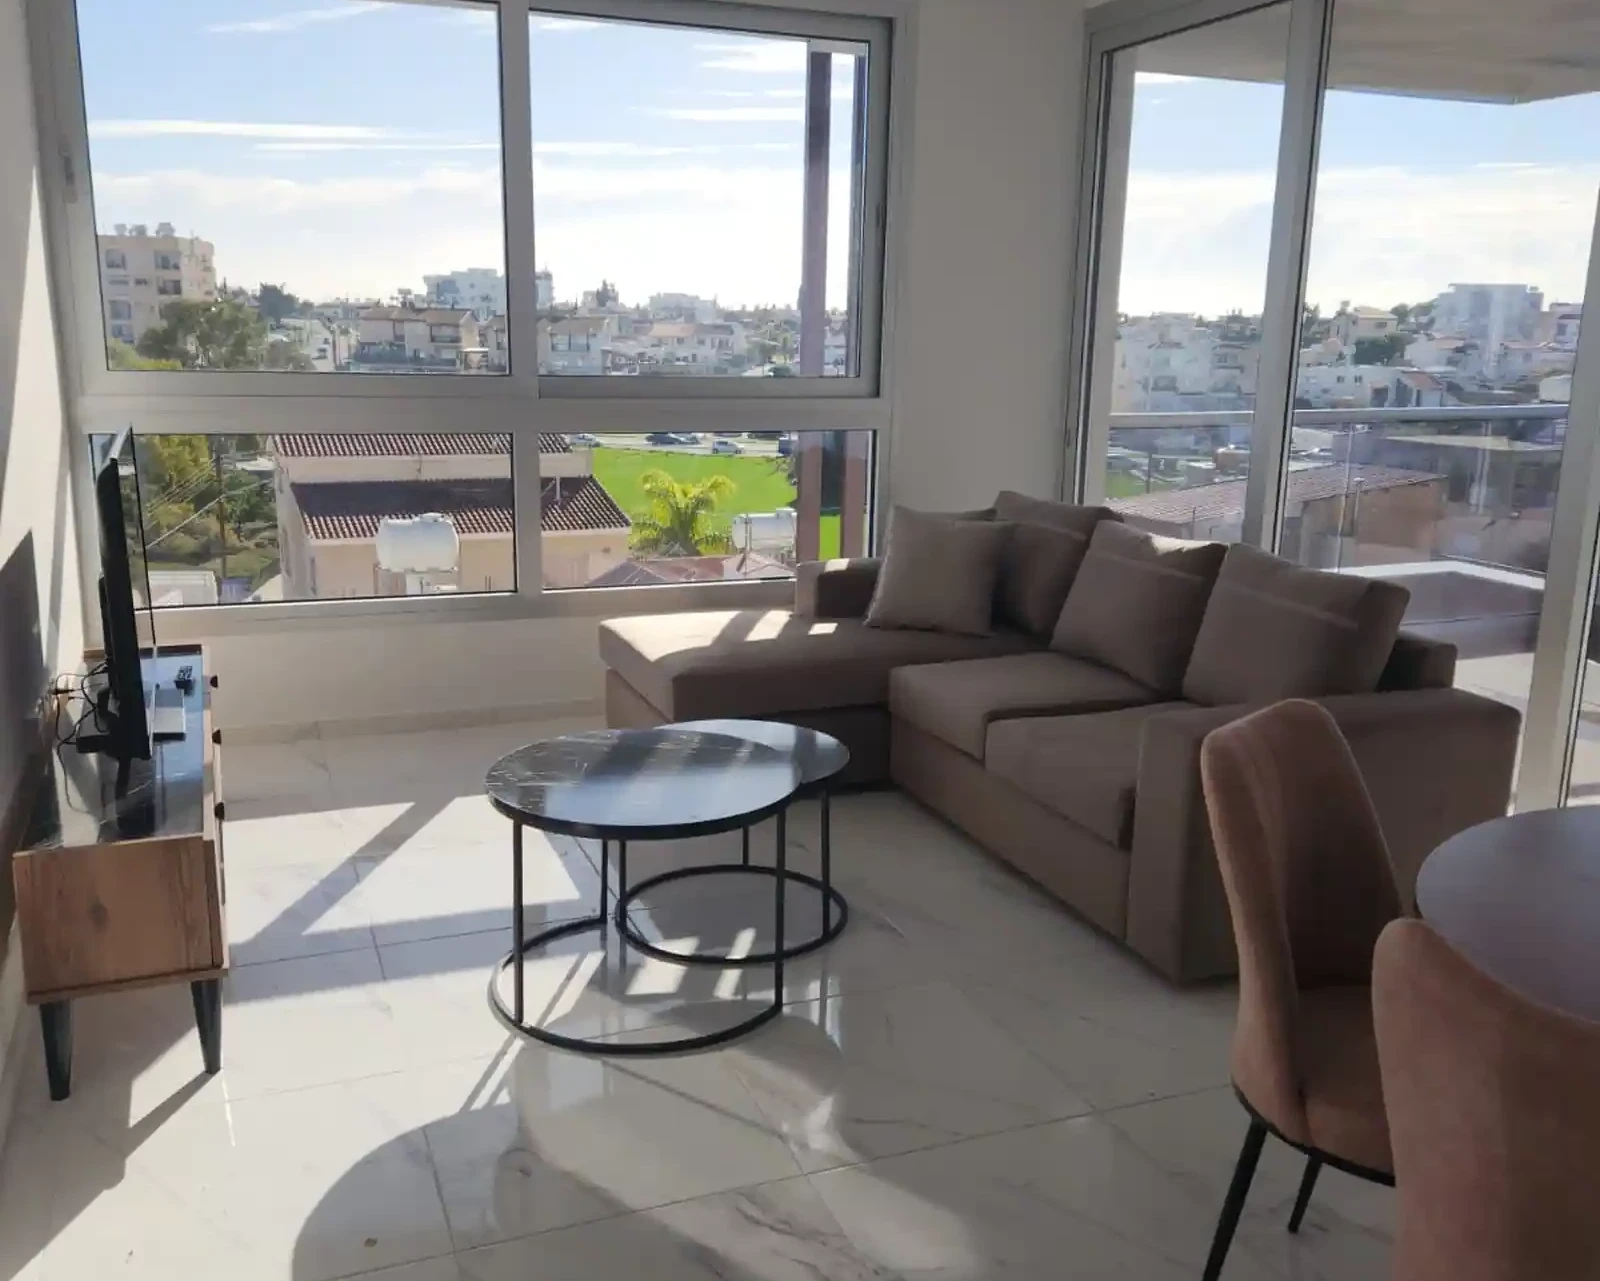 2-bedroom penthouse to rent €1.500, image 1